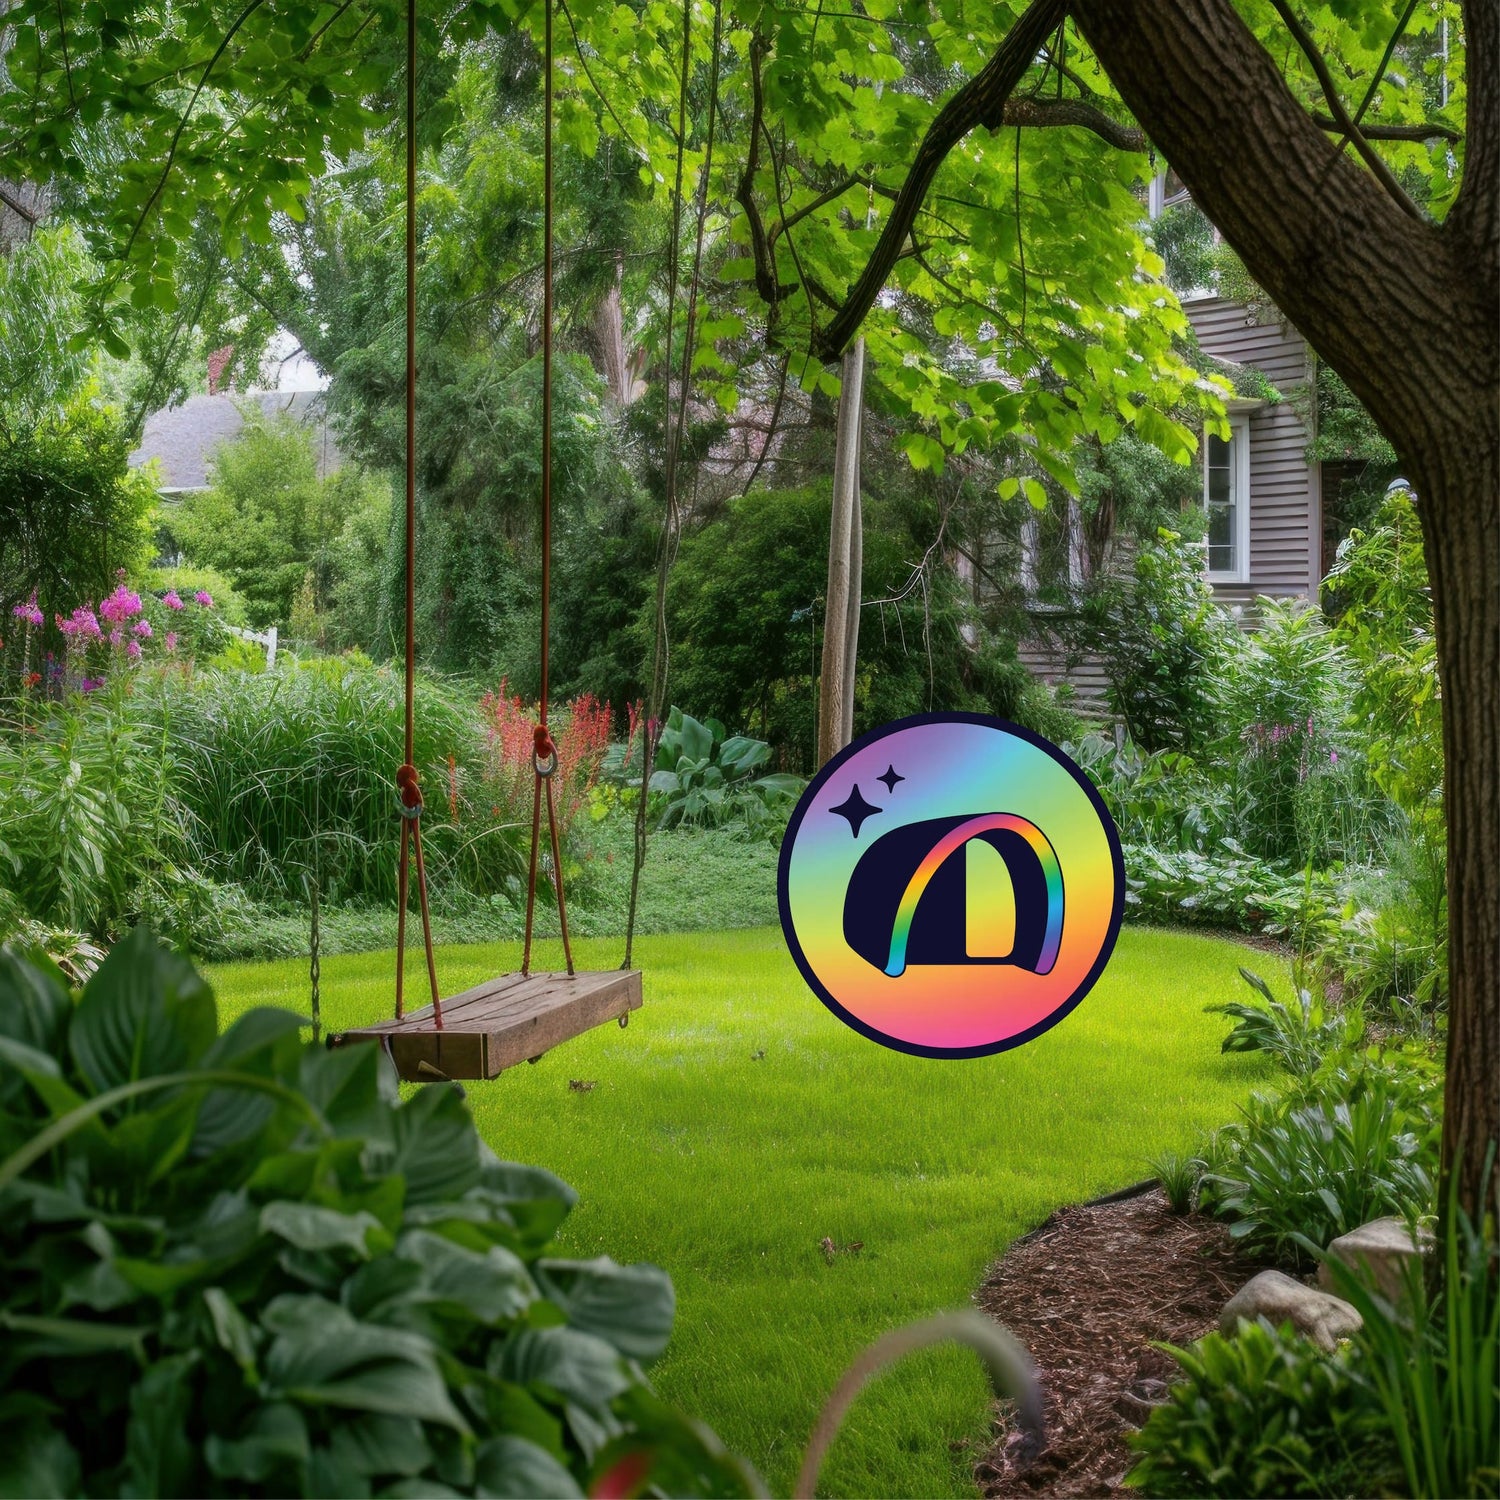 Backyard garden with green grass, swing and Good inTents Circle Logo